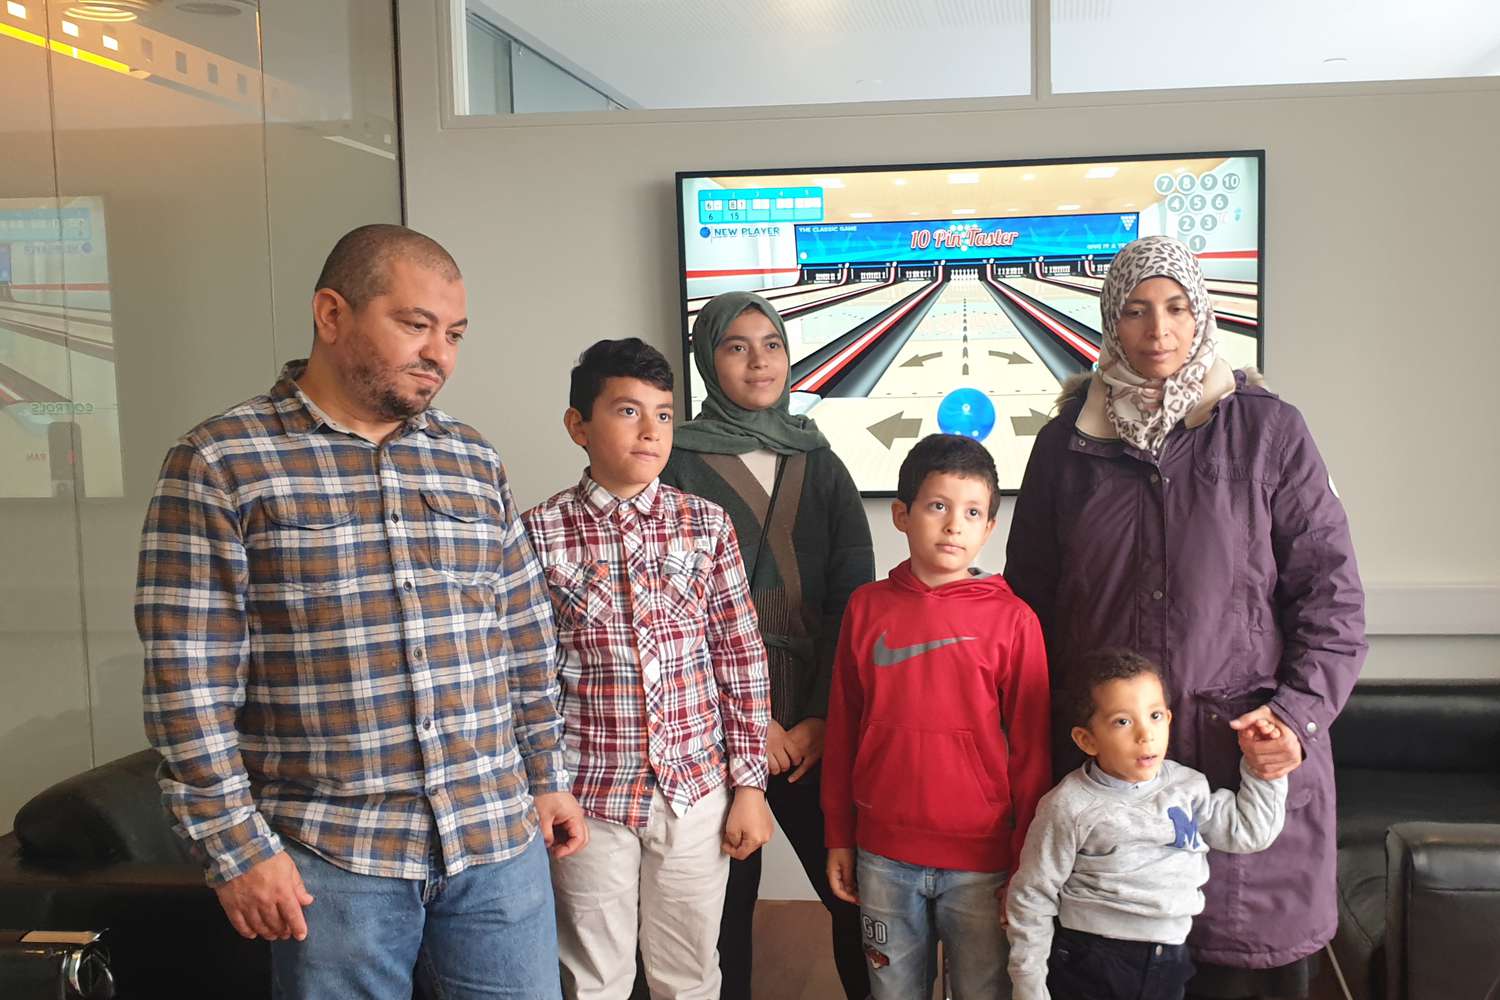 An Egyptian family granted asylum in Iceland for humanitarian reasons